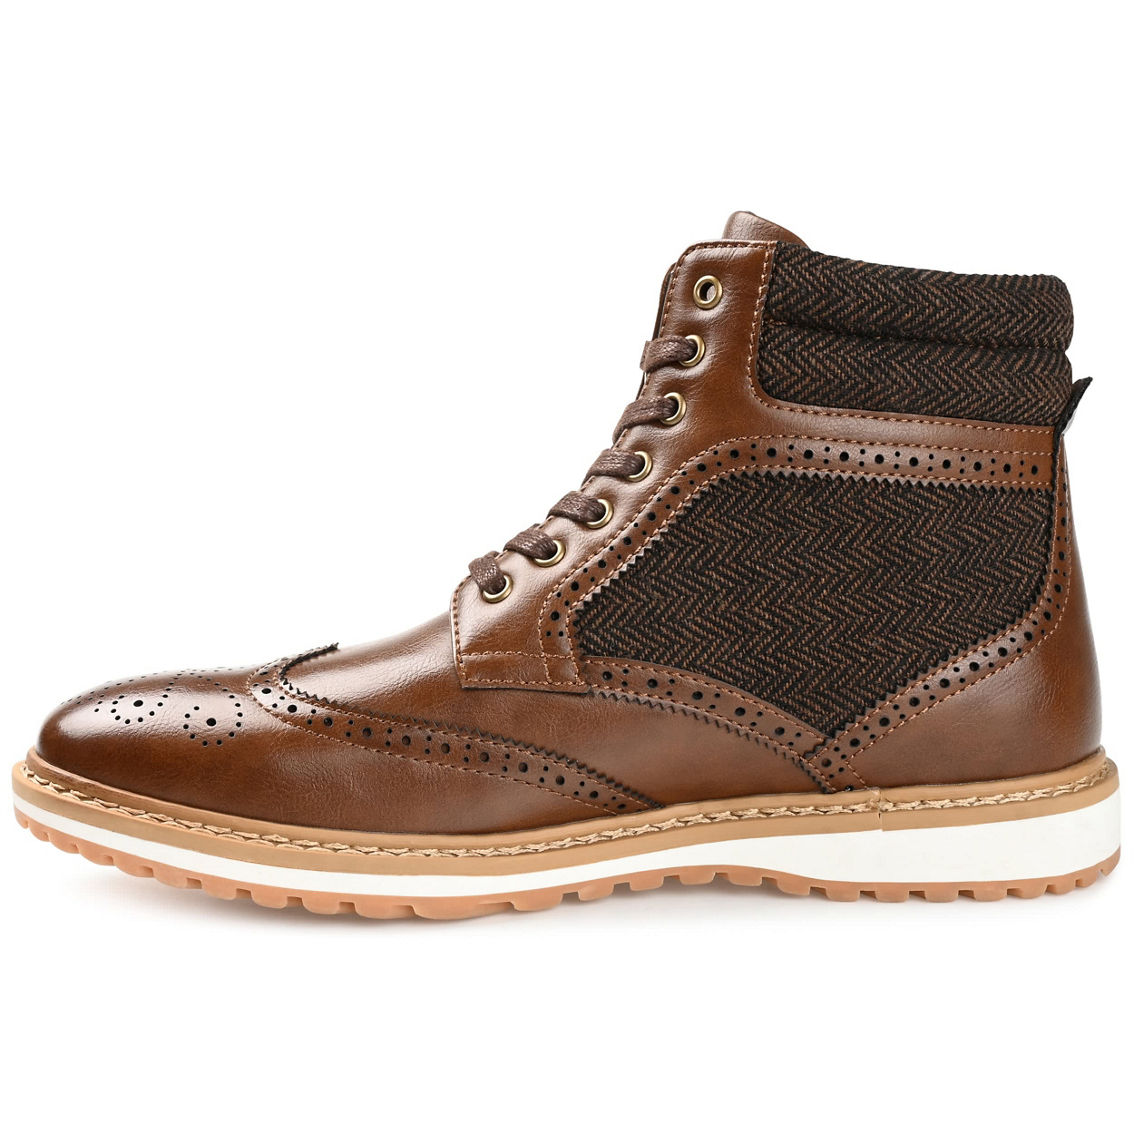 Vance Co. Harlan Wingtip Ankle Boot - Image 2 of 2